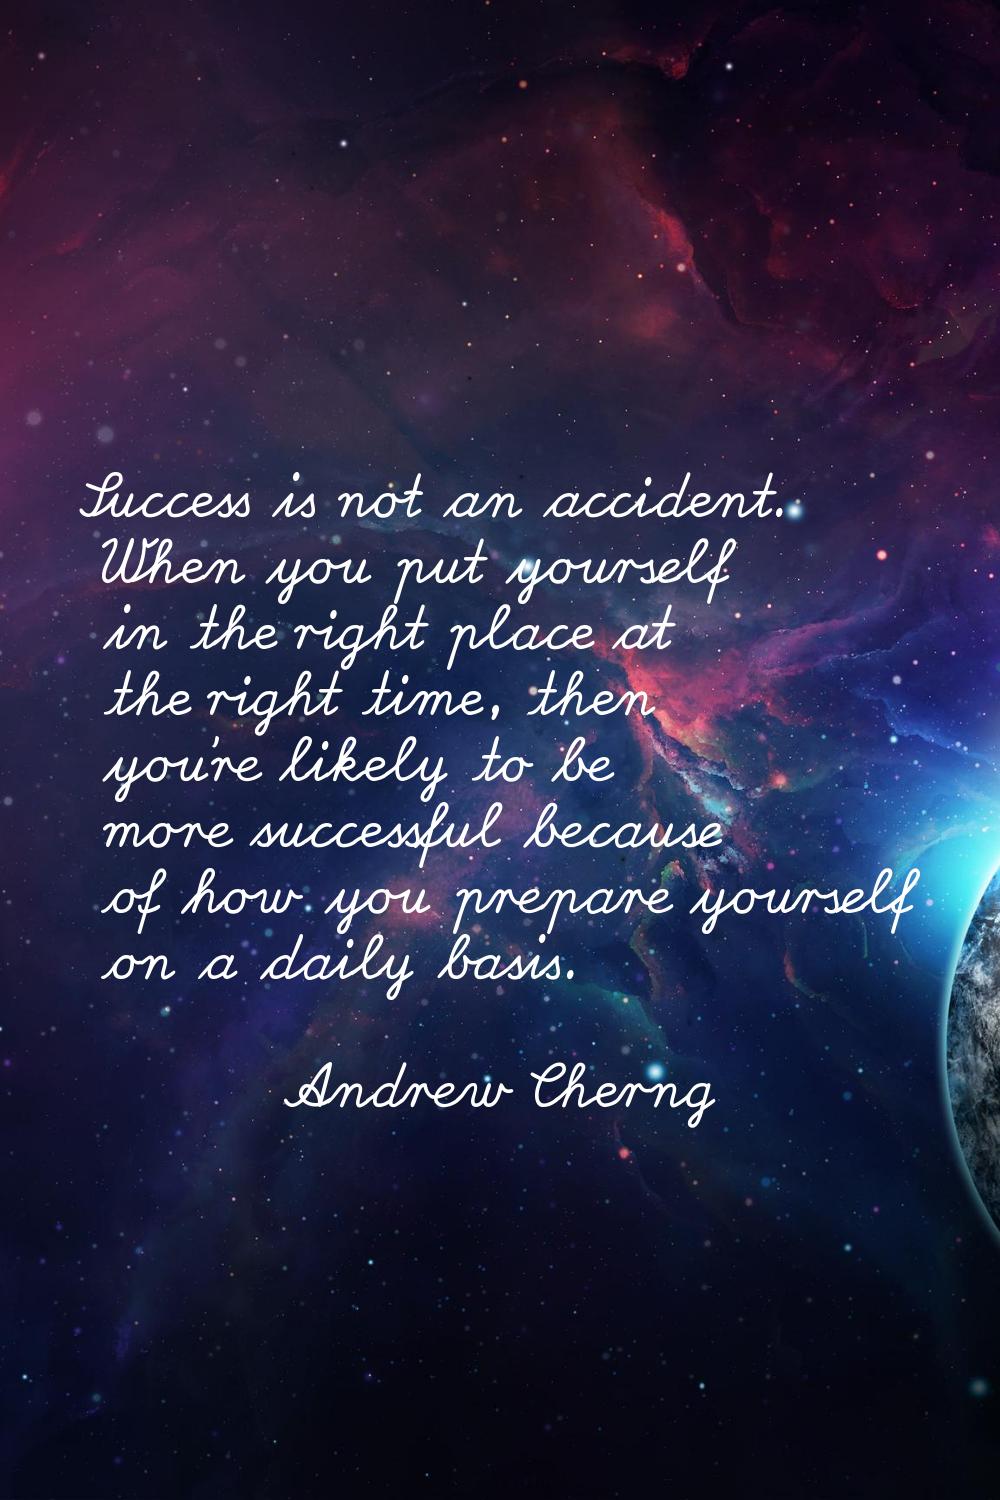 Success is not an accident. When you put yourself in the right place at the right time, then you're